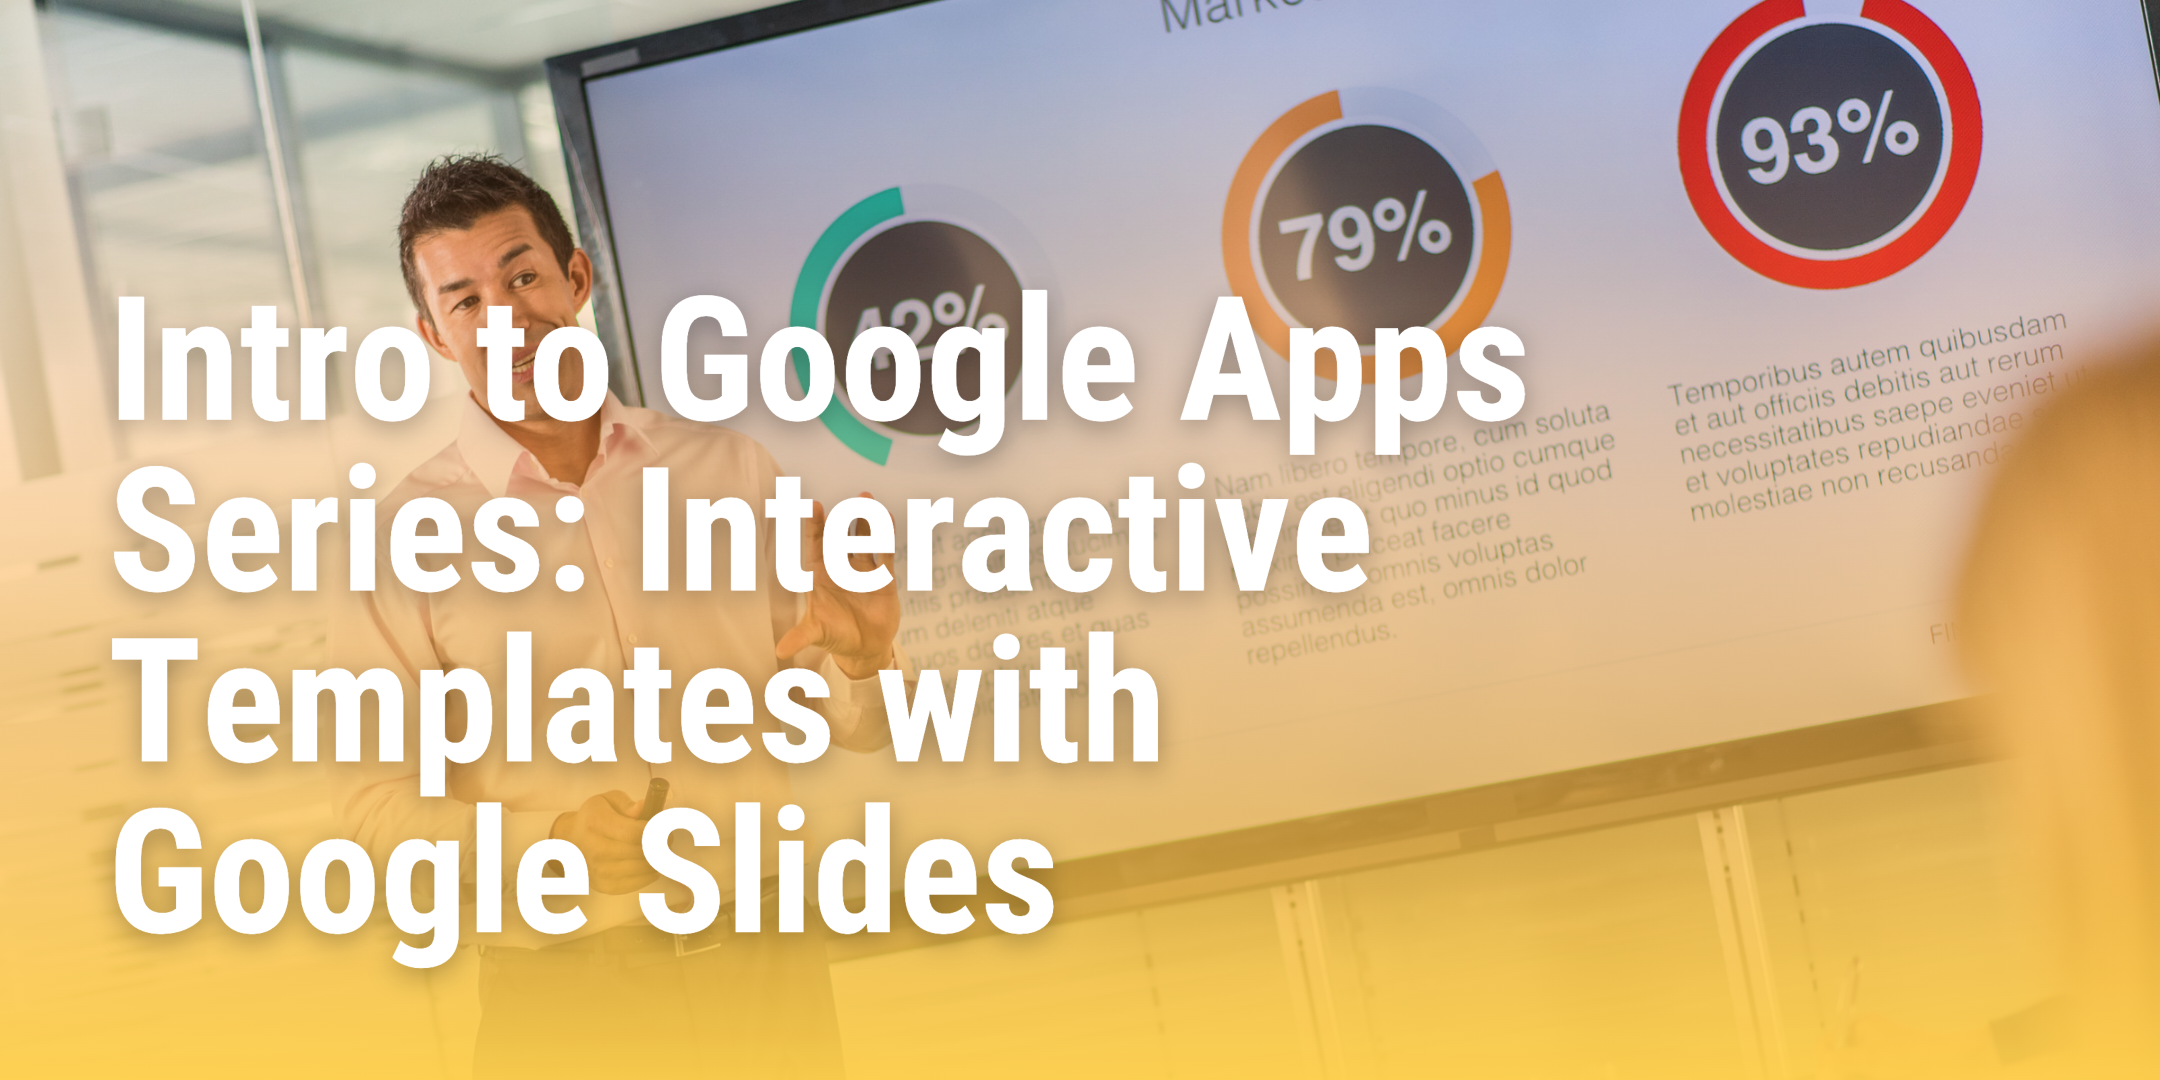 Banner displaying blog title "Intro to Google Apps Series: Interactive Templates with Google Slides".